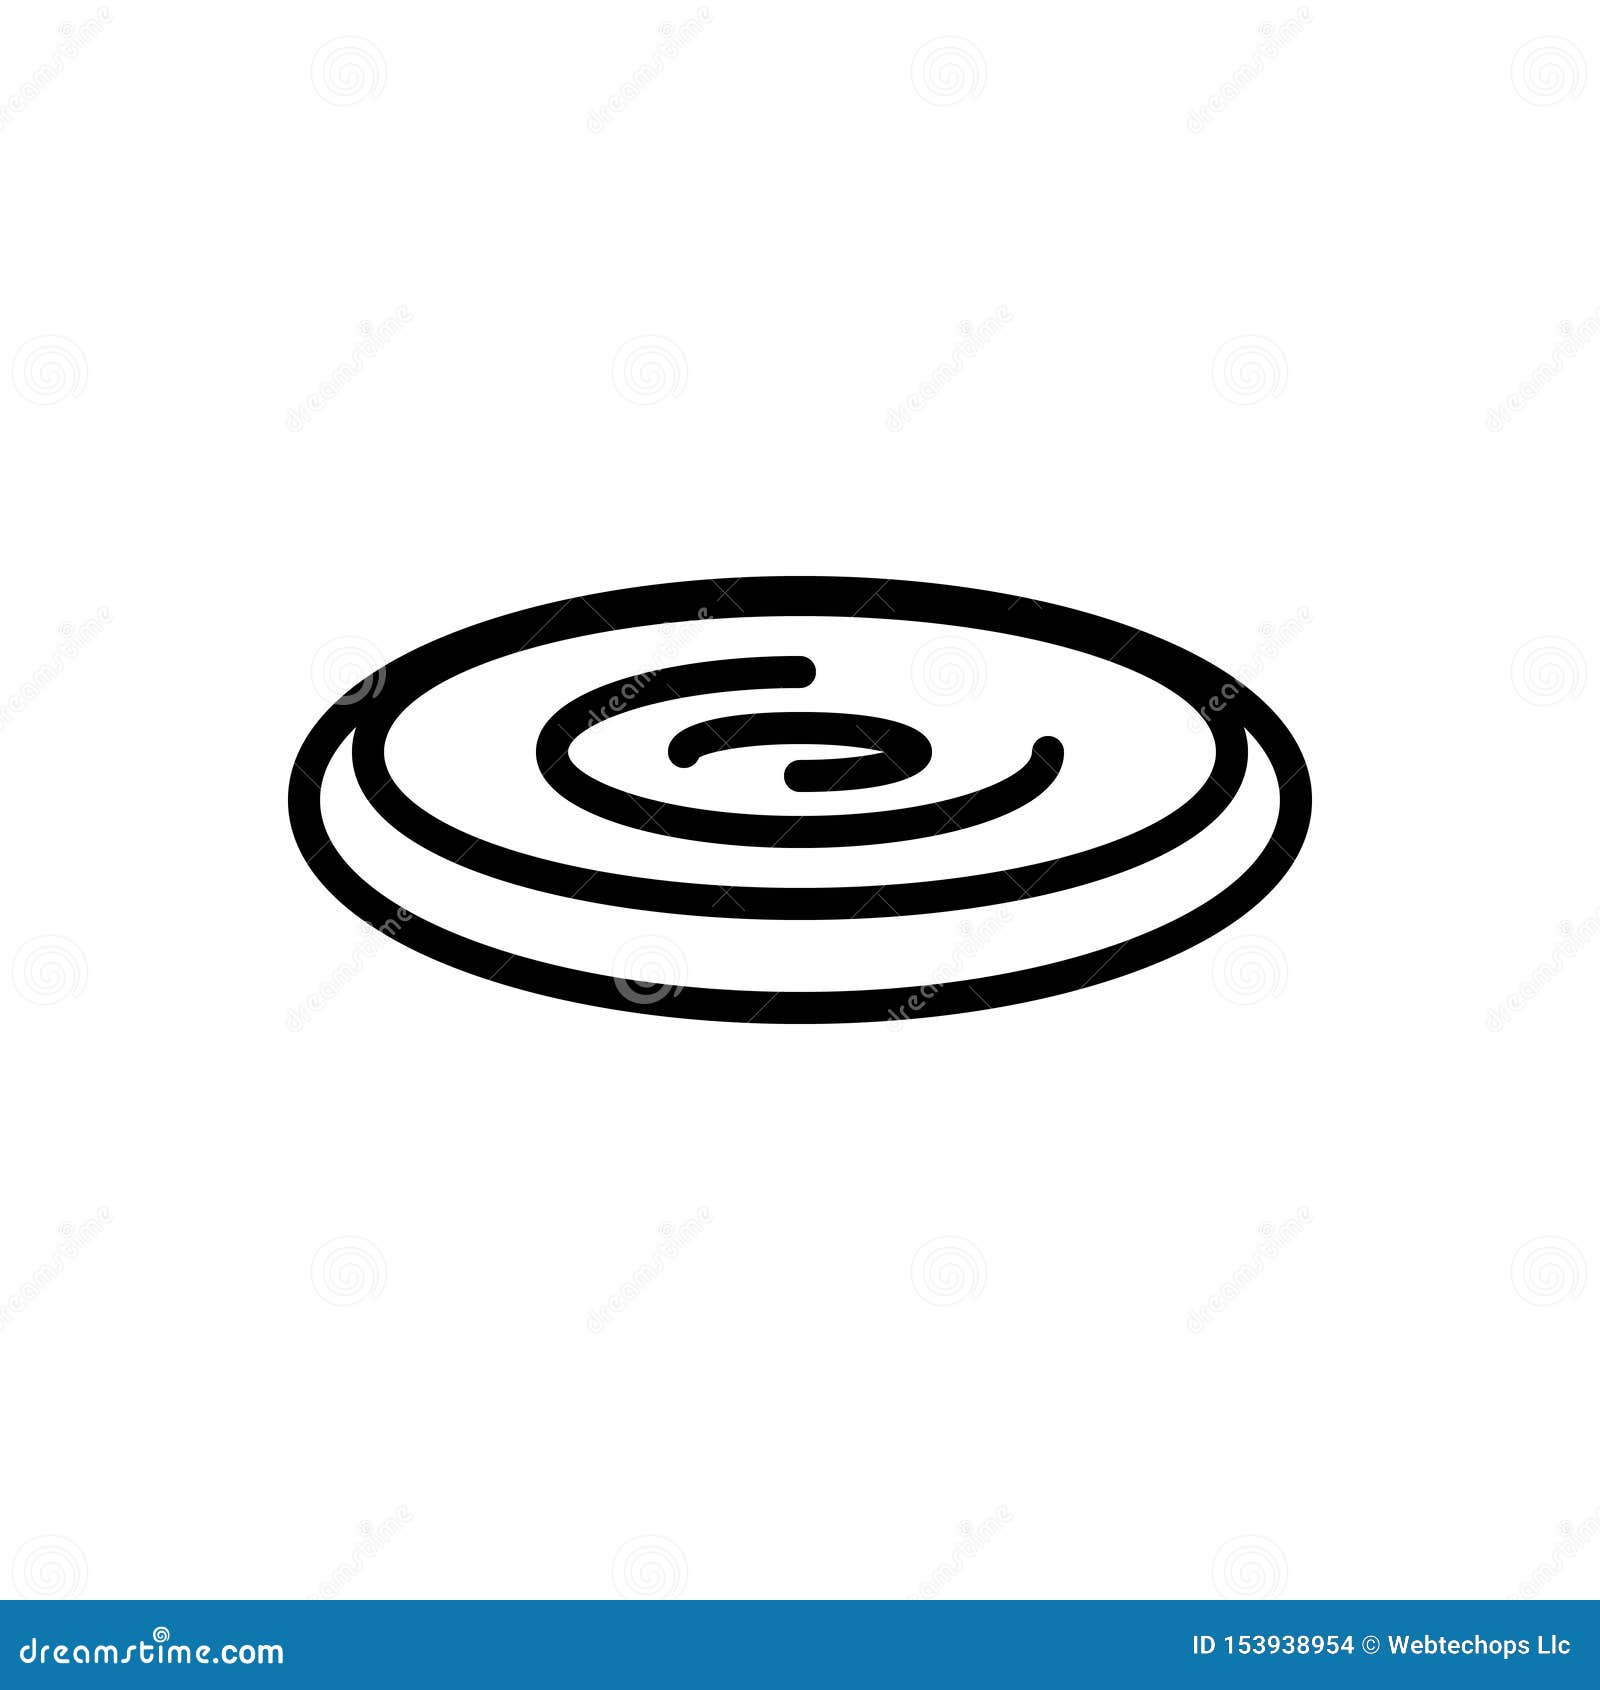 black line icon for ultimate, infinity and endlessness